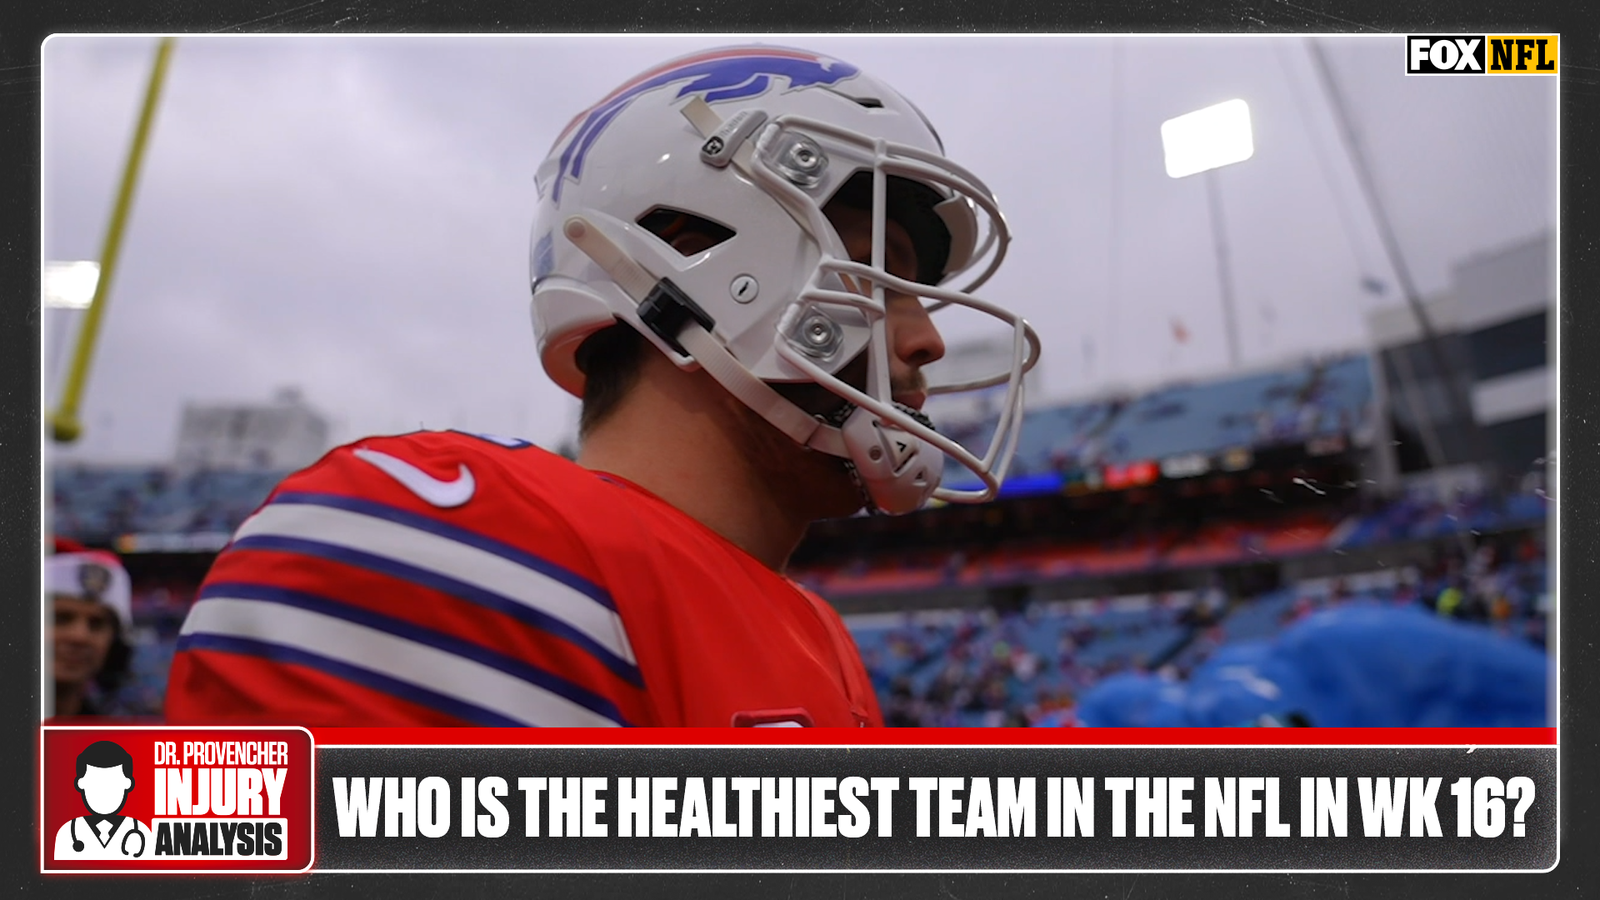 Who is the healthiest team in the NFL?